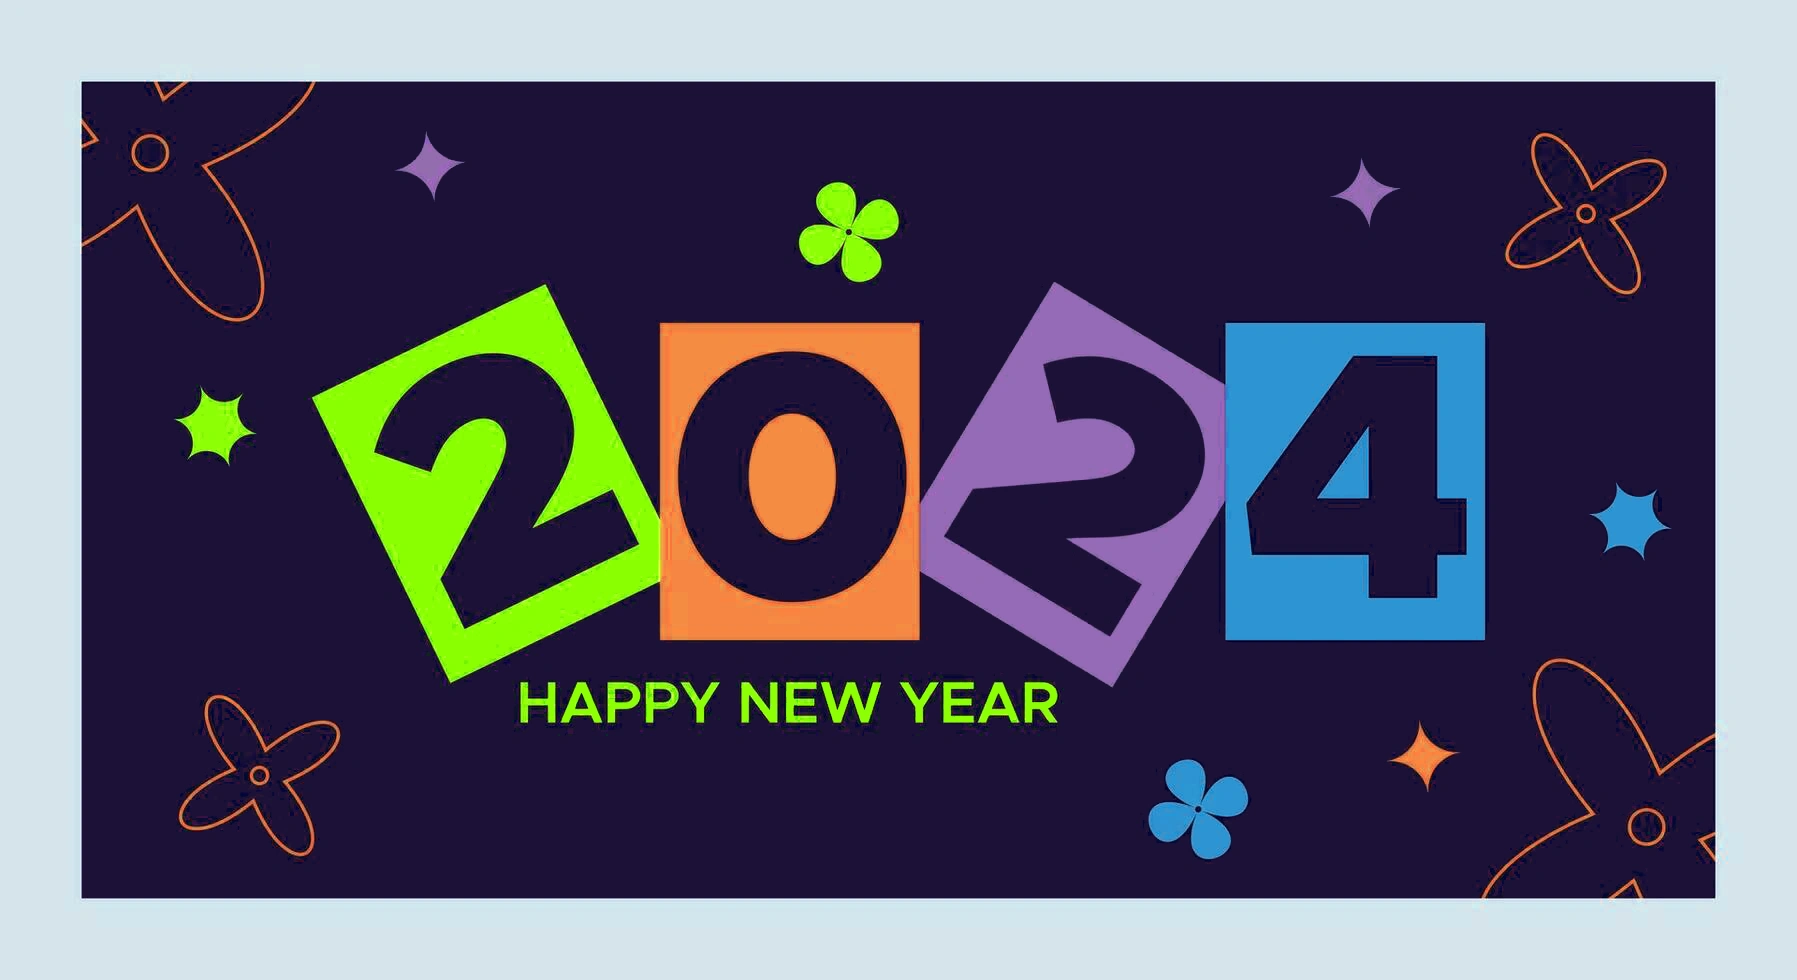 Happy New Year 2024 With Colorful Minimalistic Trendy Design Happy New Year 2024 Square Template Greeting Background Designs New Year And Social Media Promotional Content Illustration Vector